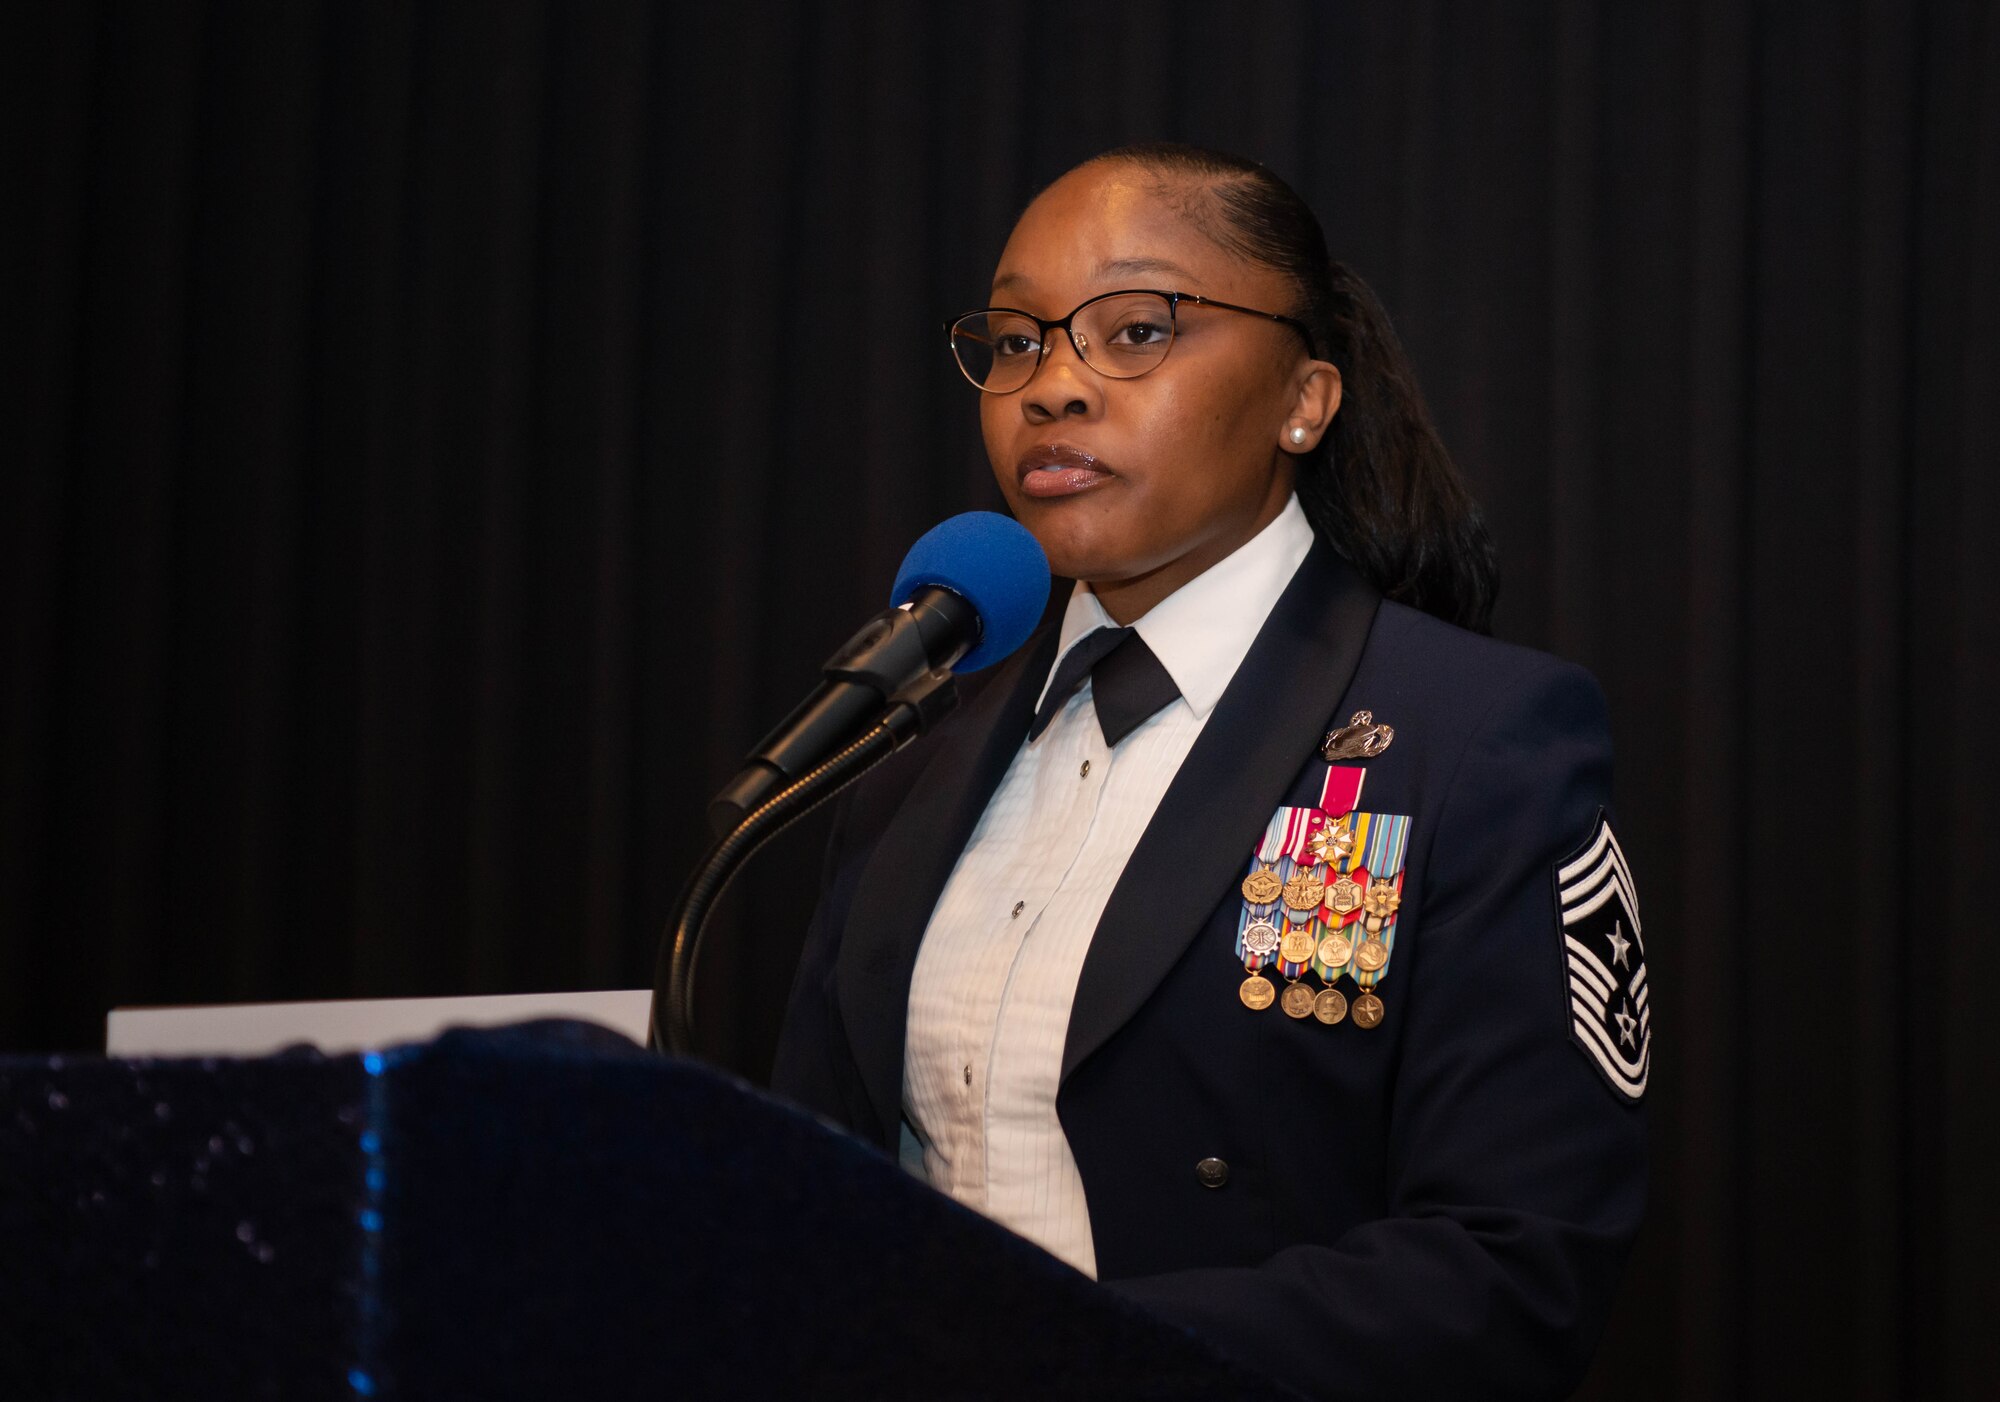 Chief Master Sgt. Charmaine Kelley speaks at a Chief Recognition Ceremony